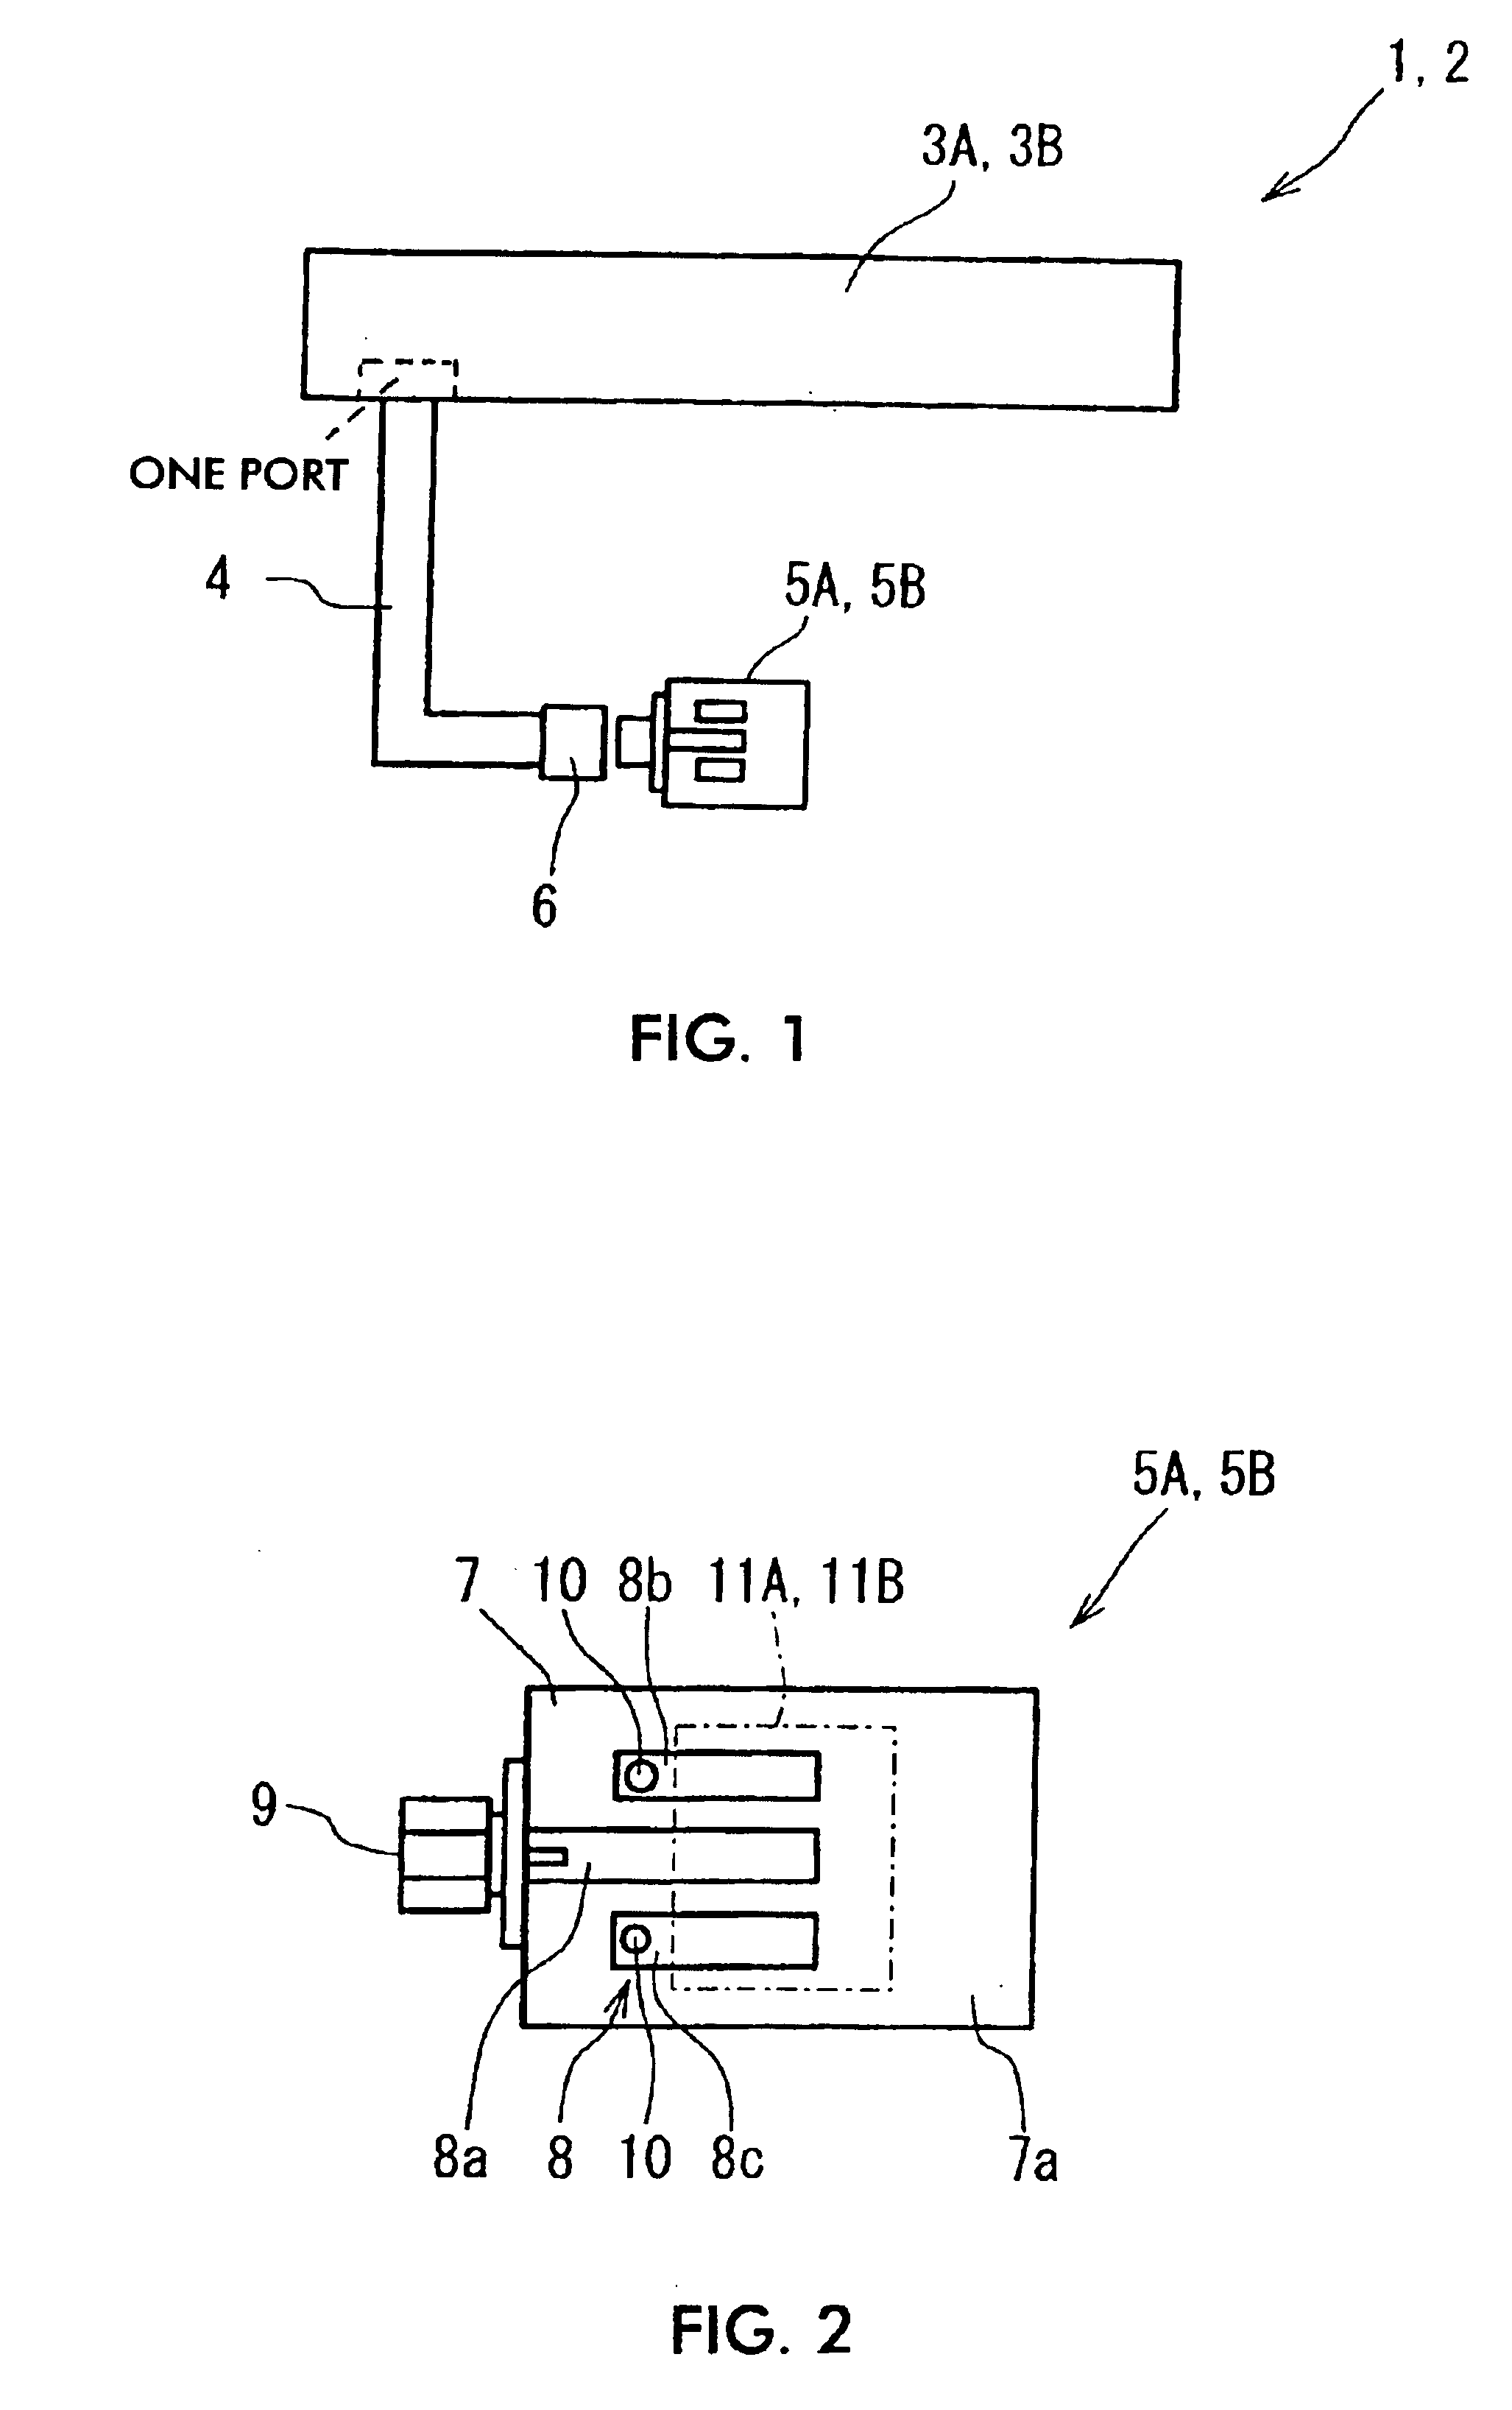 Method for correcting measurement error, method of determining quality of electronic component, and device for measuring characteristic of electronic component